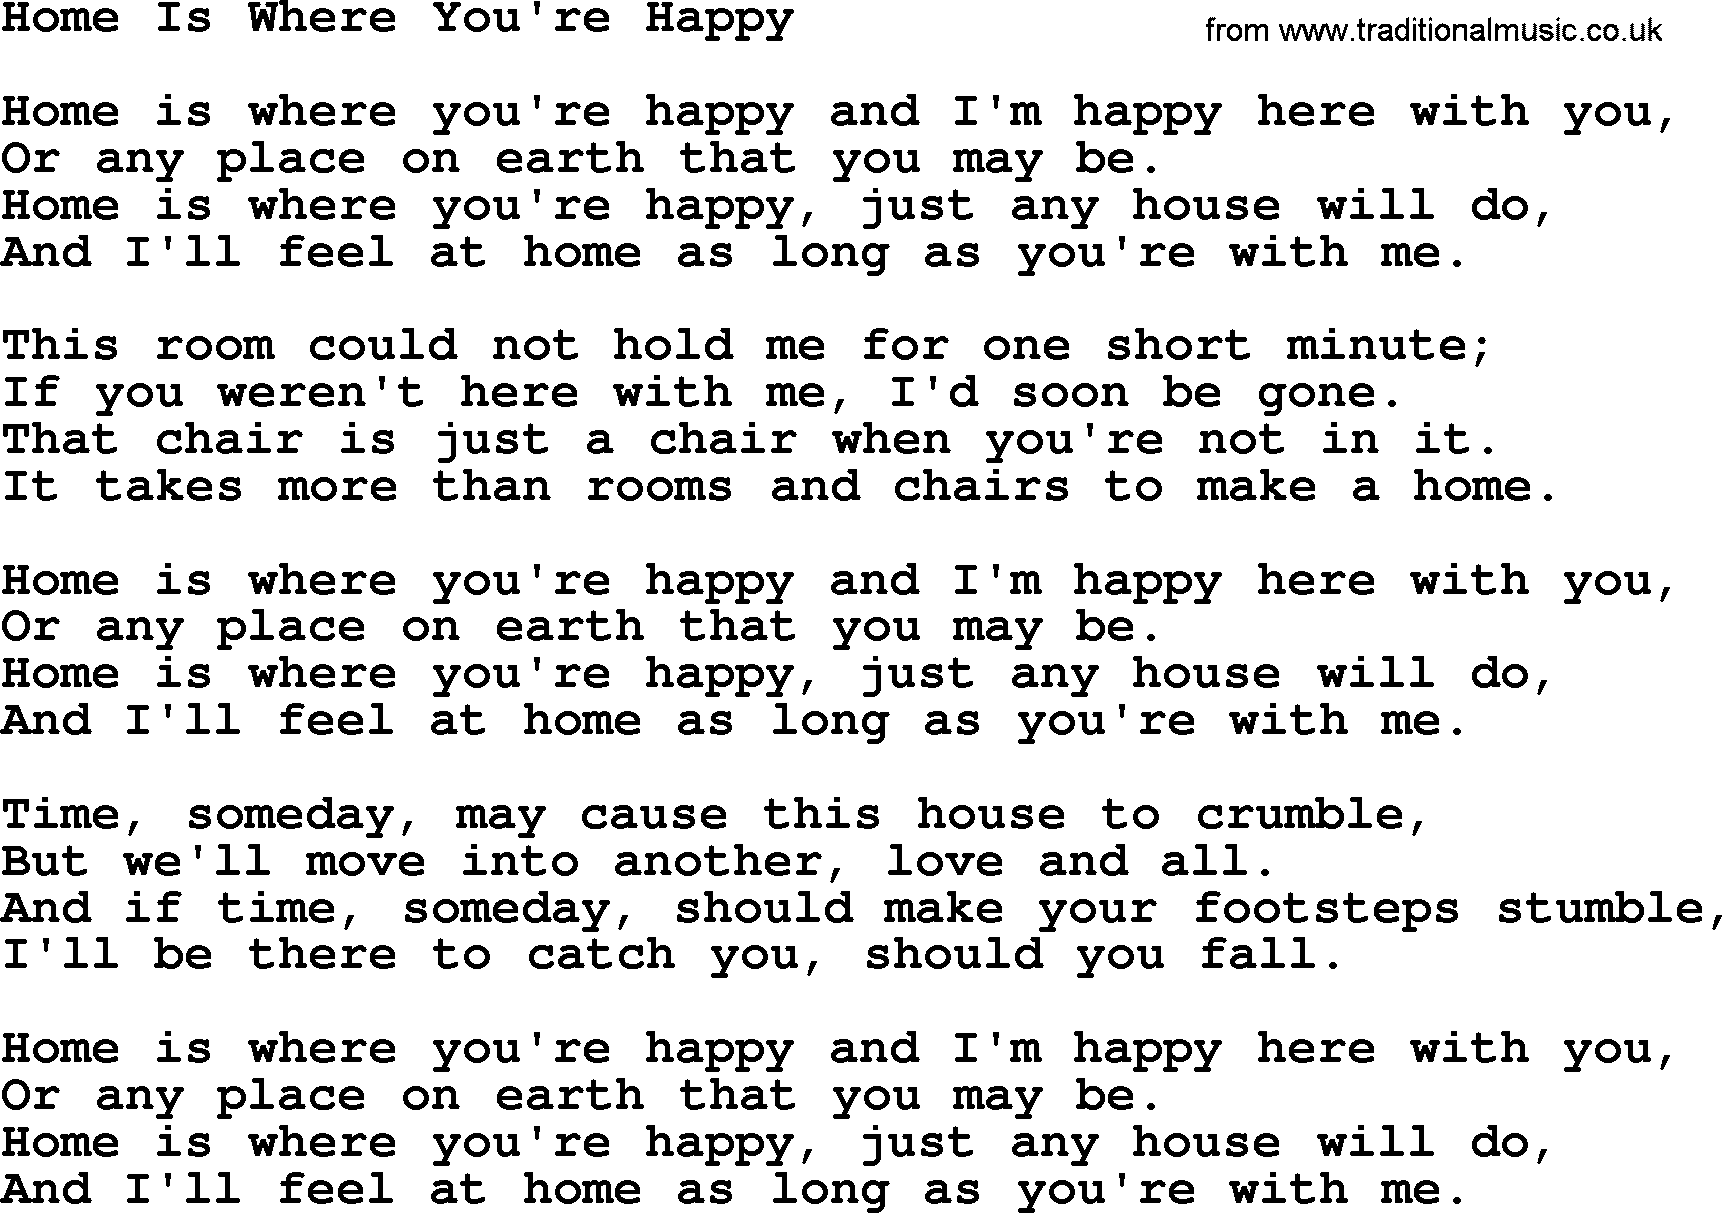 Willie Nelson song: Home Is Where You're Happy lyrics